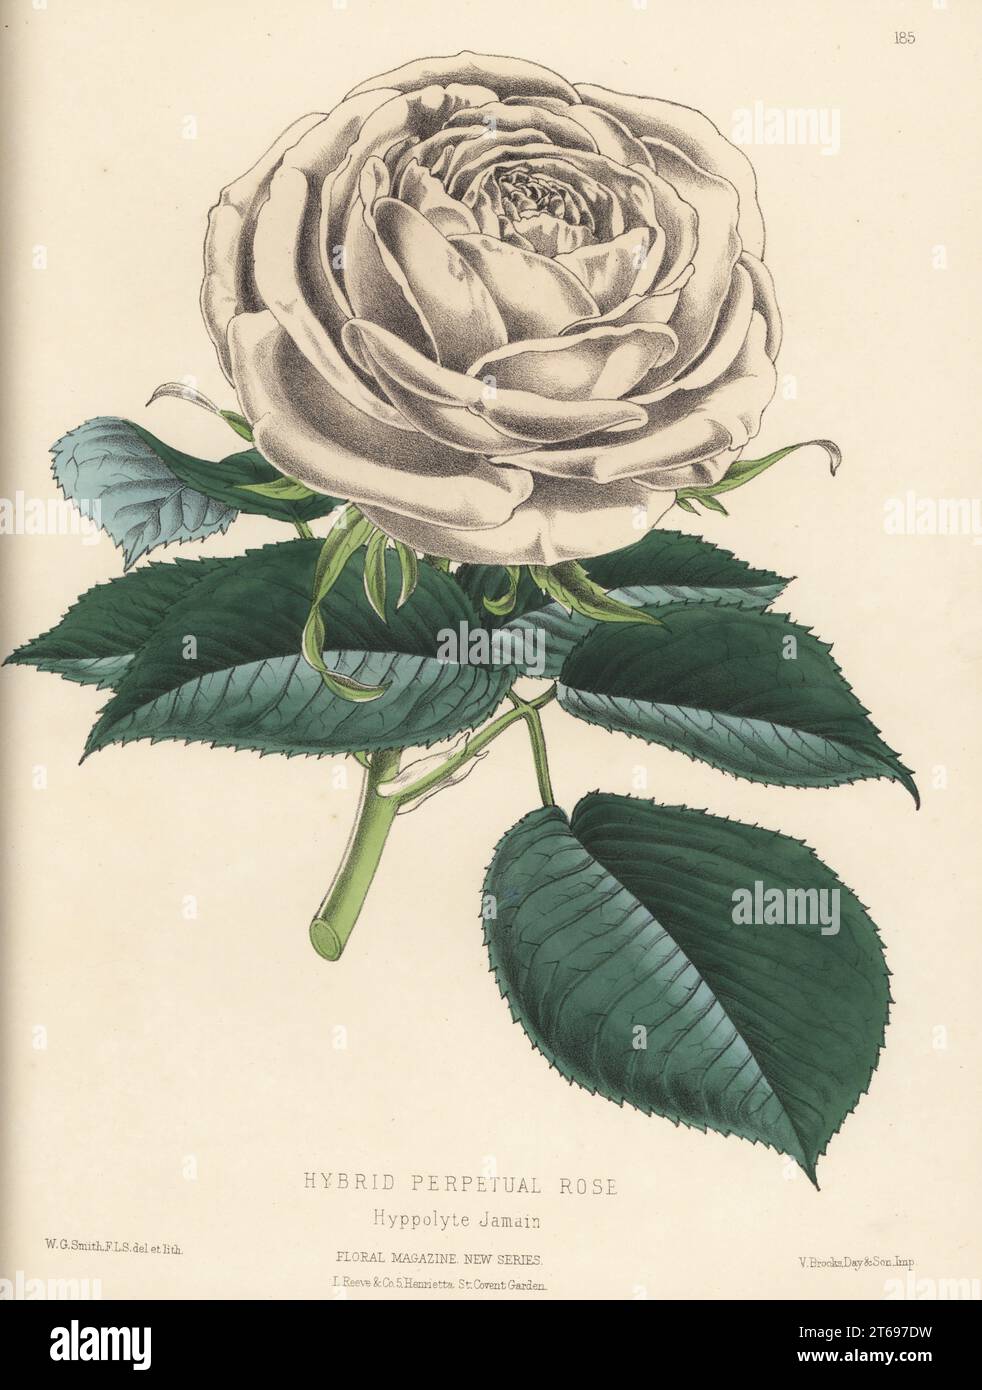 Hybrid perpetual rose, Hyppolyte Jamain. Grown by Henry Bennett, Manor Farm Nursery, originally raised by Francois Lacharme. Handcolored botanical illustration drawn and lithographed by Worthington George Smith from Henry Honywood Dombrain's Floral Magazine, New Series, Volume 4, L. Reeve, London, 1875. Lithograph printed by Vincent Brooks, Day & Son. Stock Photo